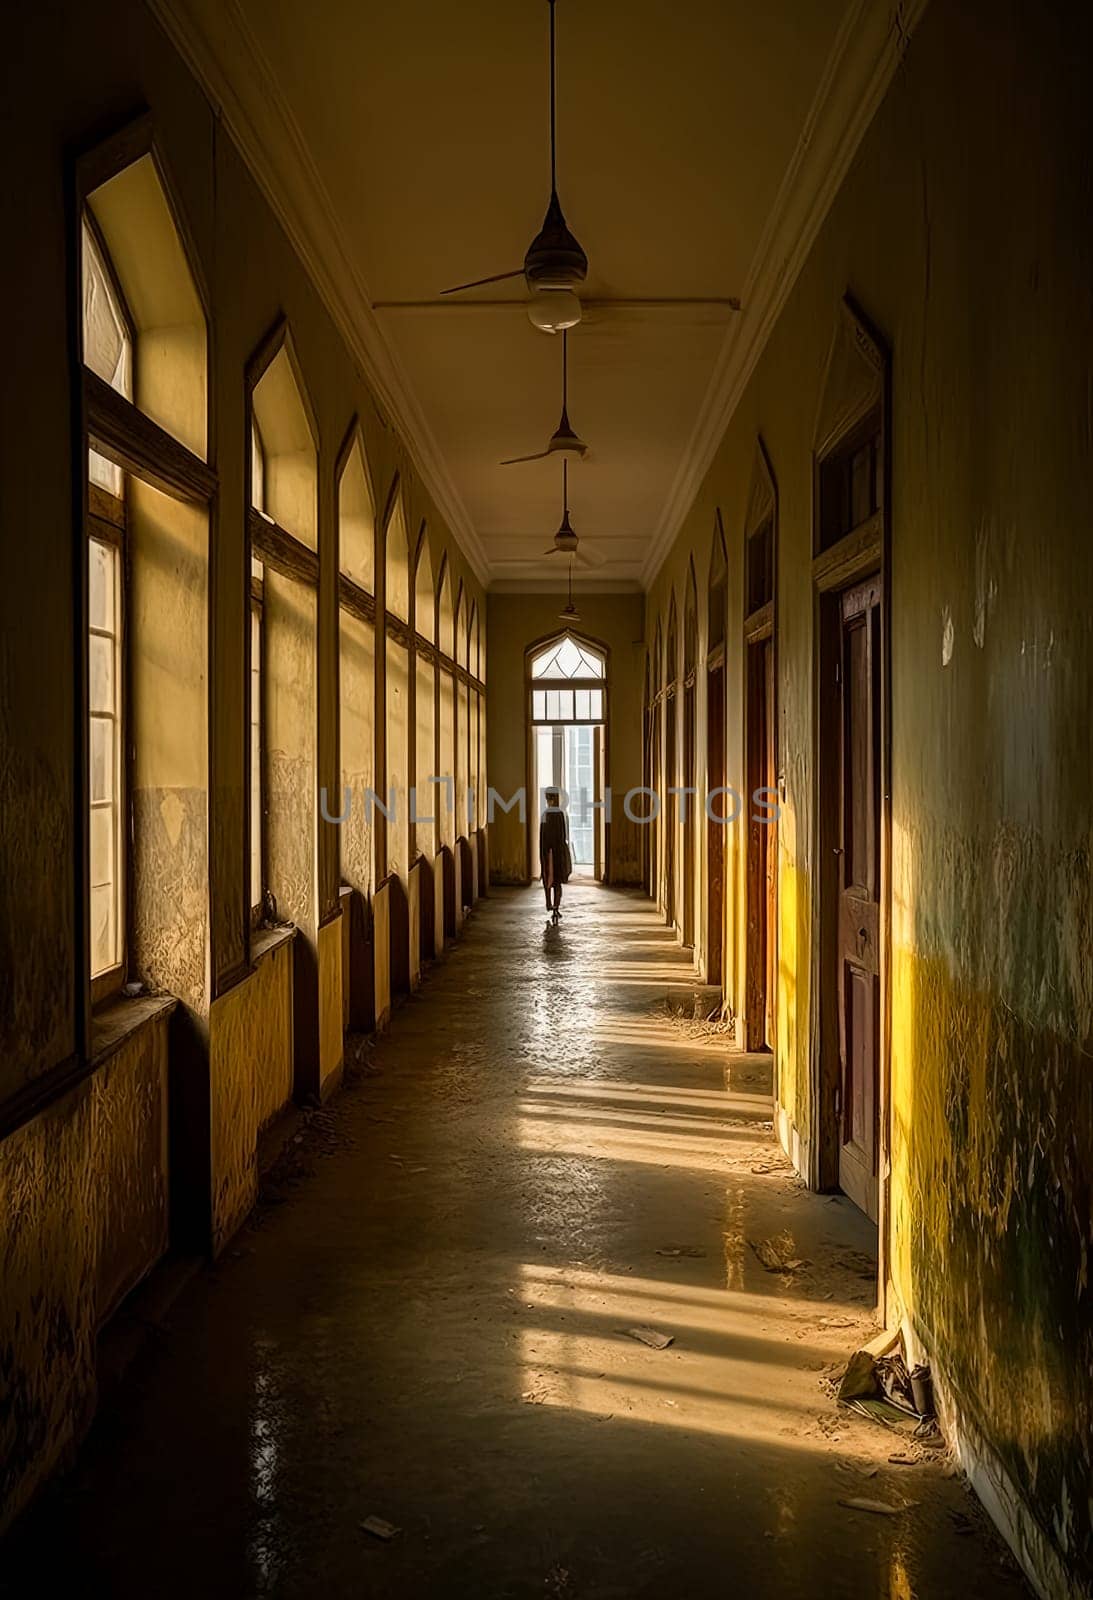 A person is walking down a long hallway with a window in the background. The hallway is empty and the person is the only one in the scene